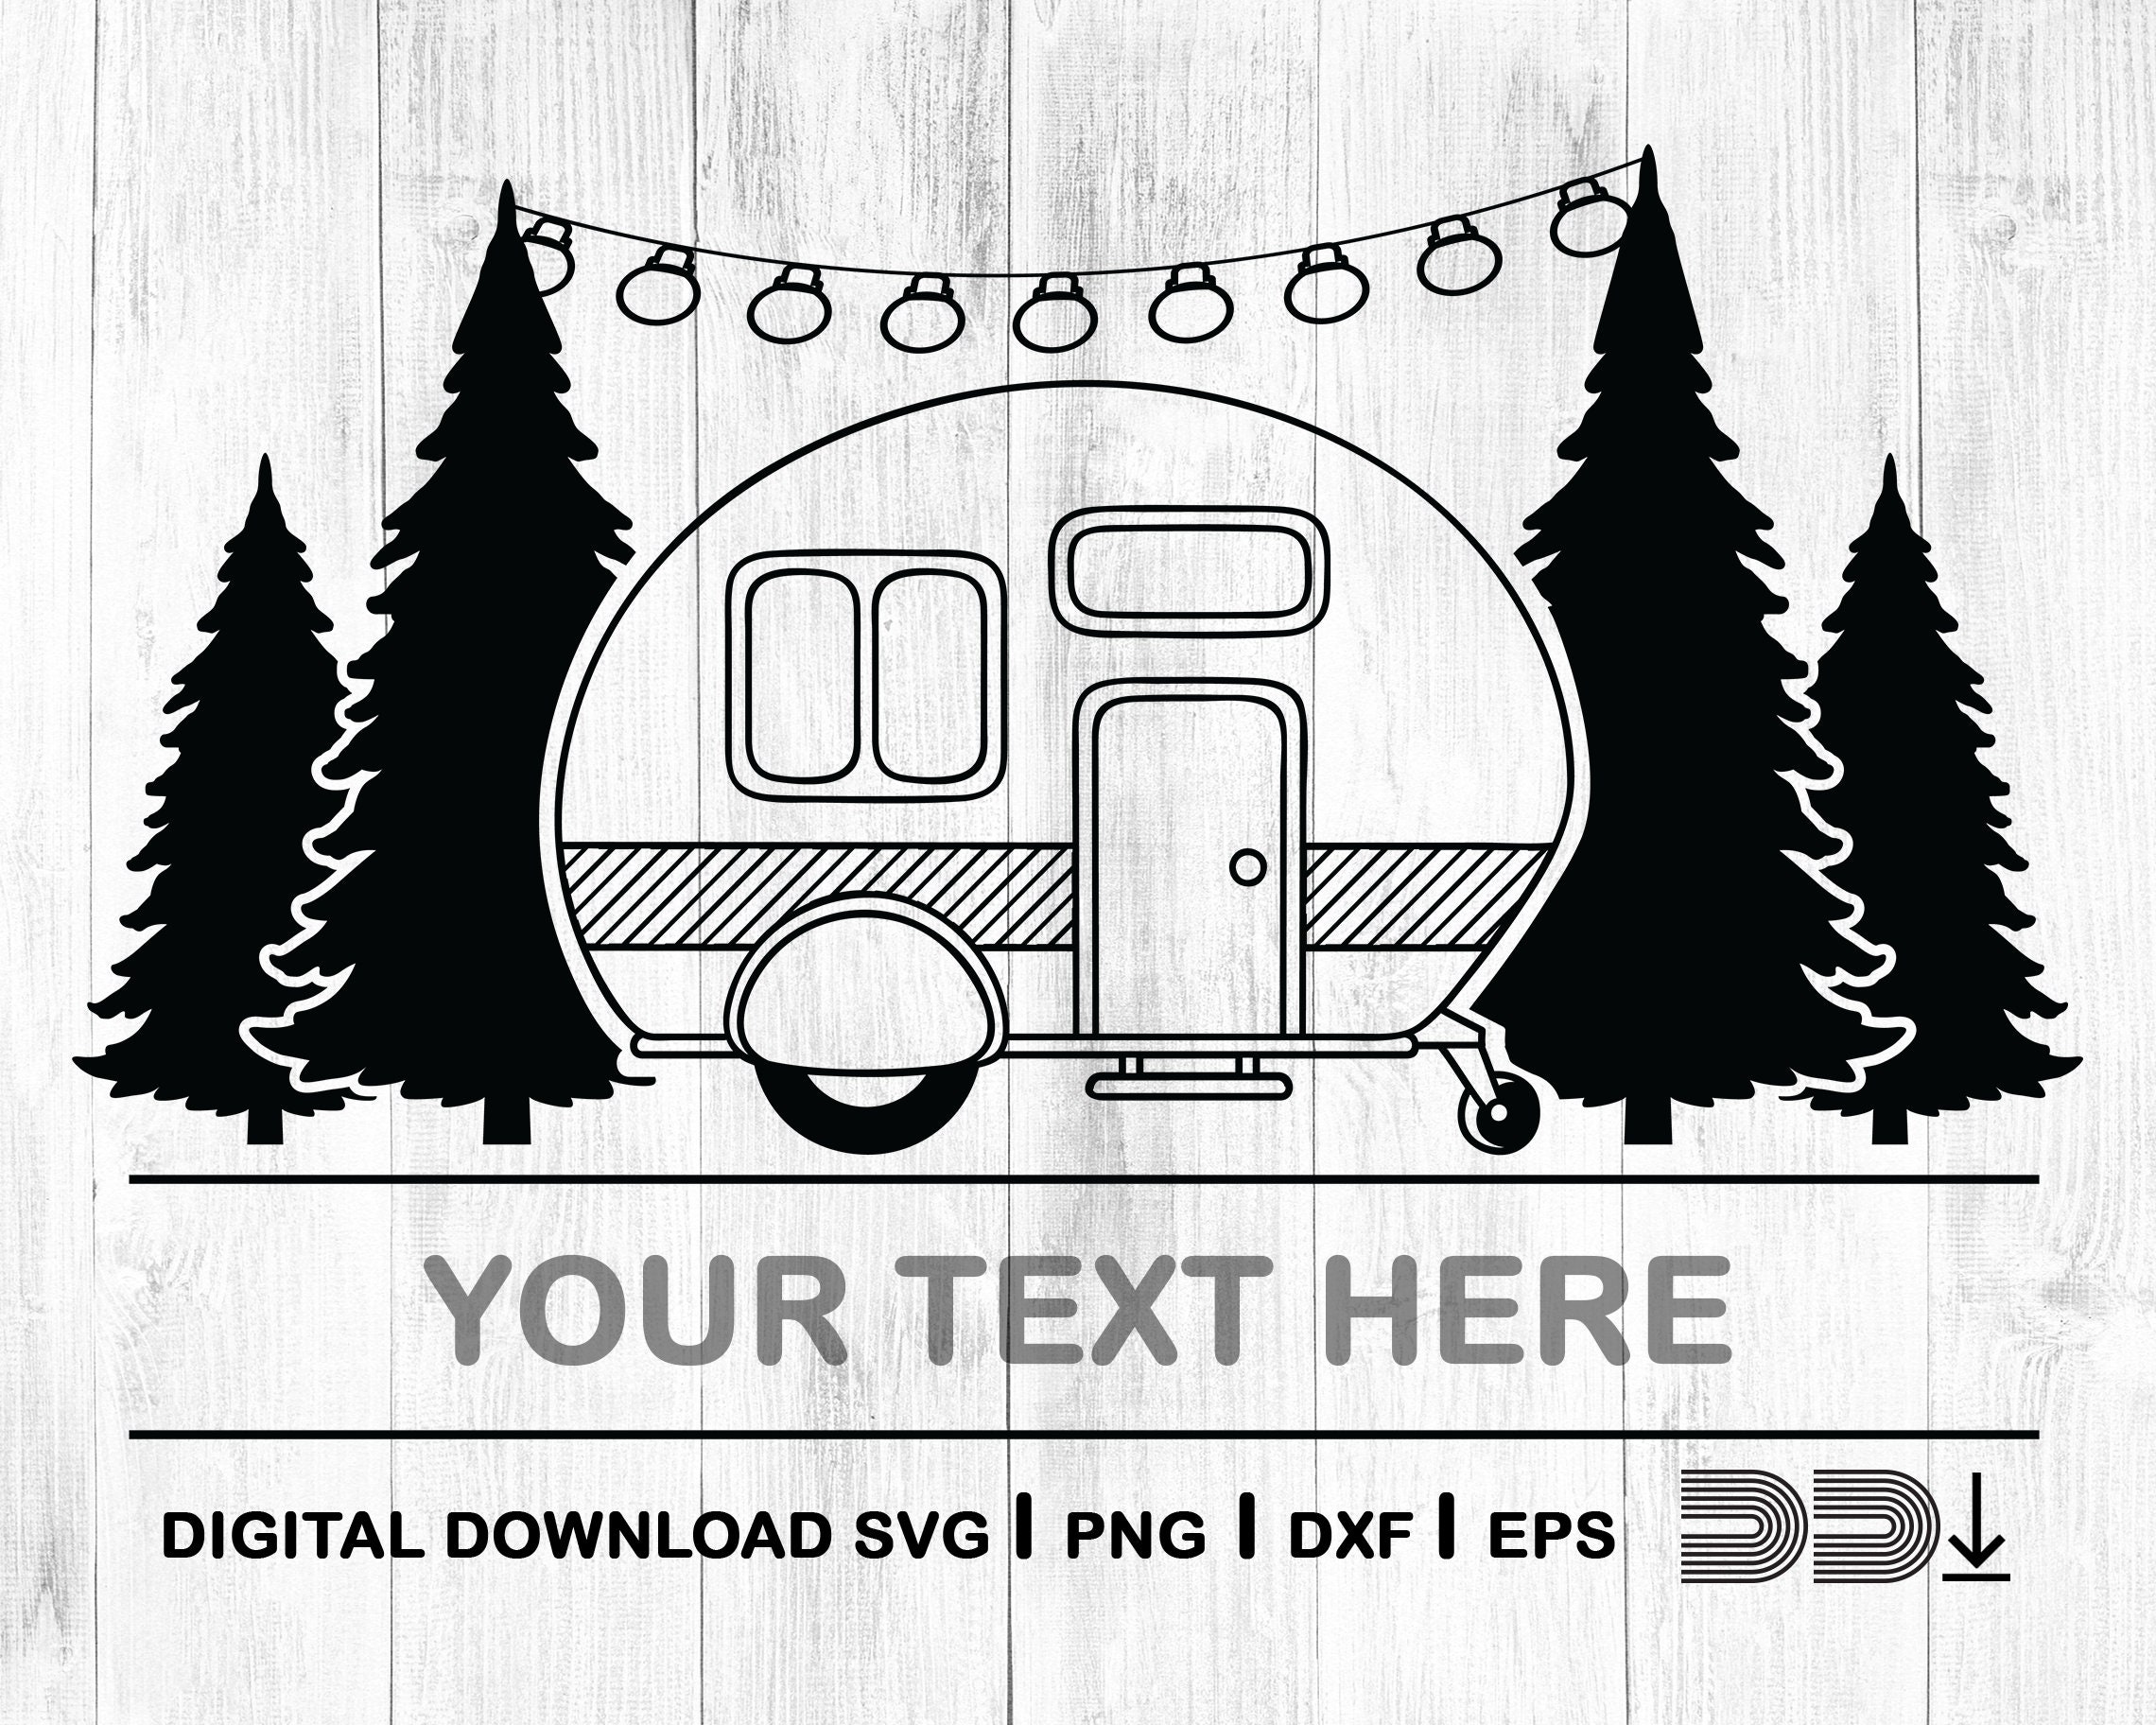 Your text here svg Adventure Svg Camping Svg Happy Camper | Etsy